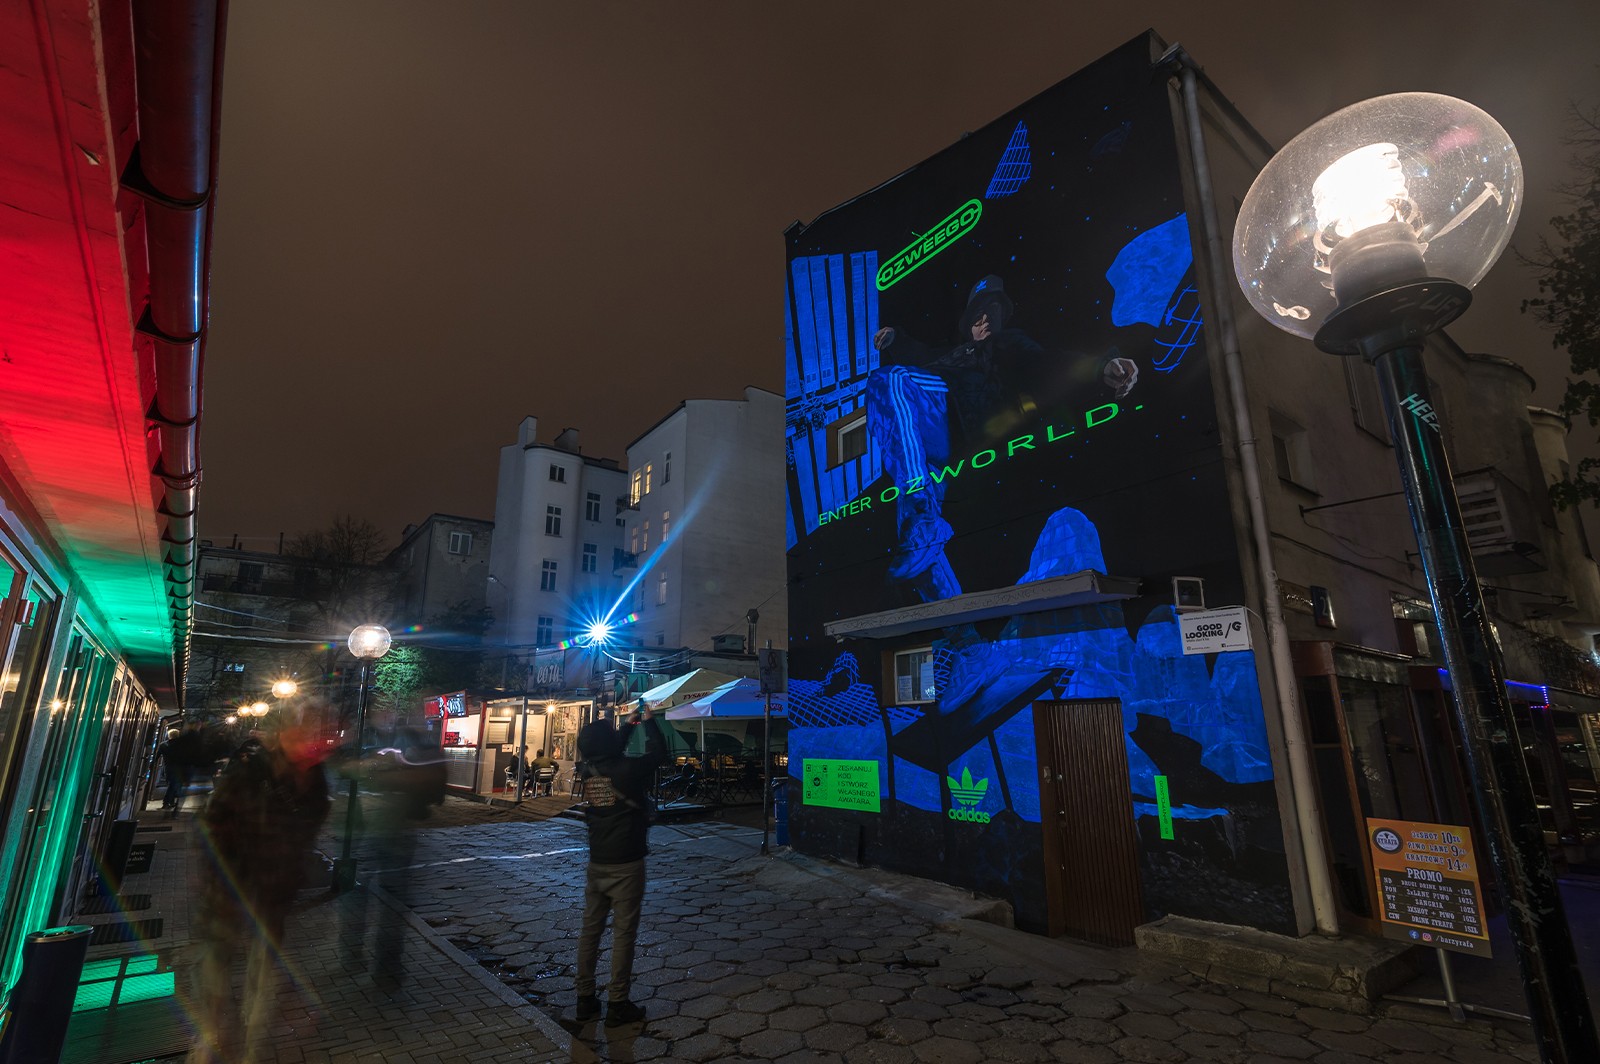 Artistic mural with fluor and UV paintings in Warsaw | Enter OZWORLD | Portfolio